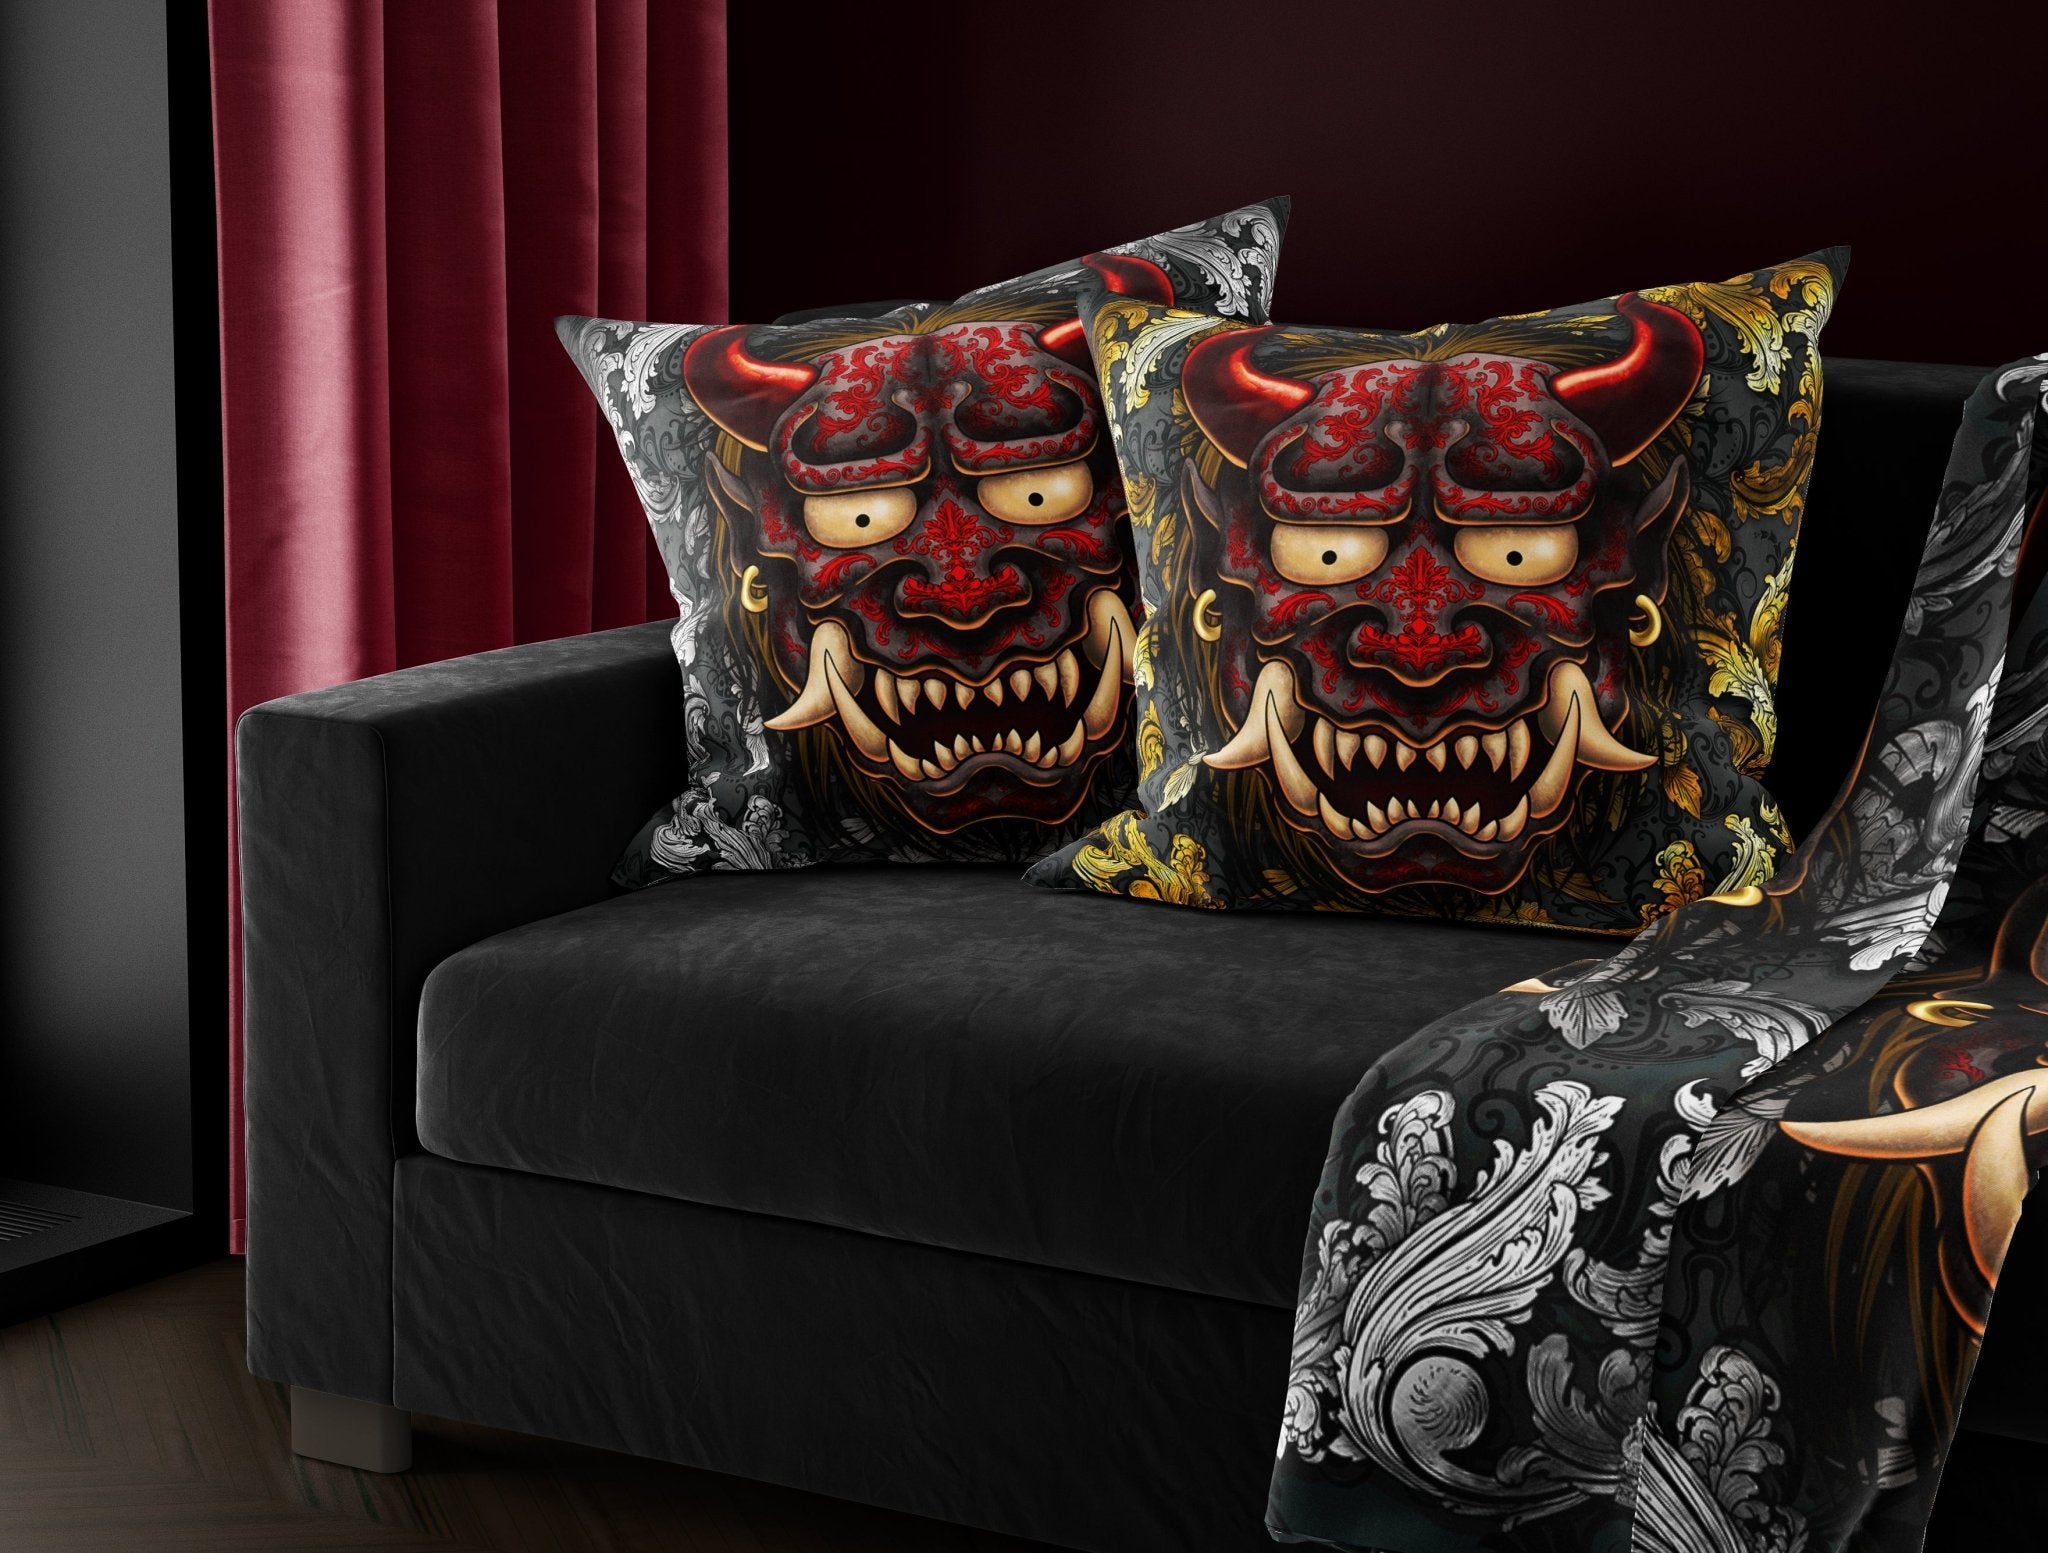 Silver Oni Throw Pillow, Decorative Accent Pillow, Square Cushion Cover, Japanese Demon, Alternative Home - Red or Black, 2 Colors - Abysm Internal